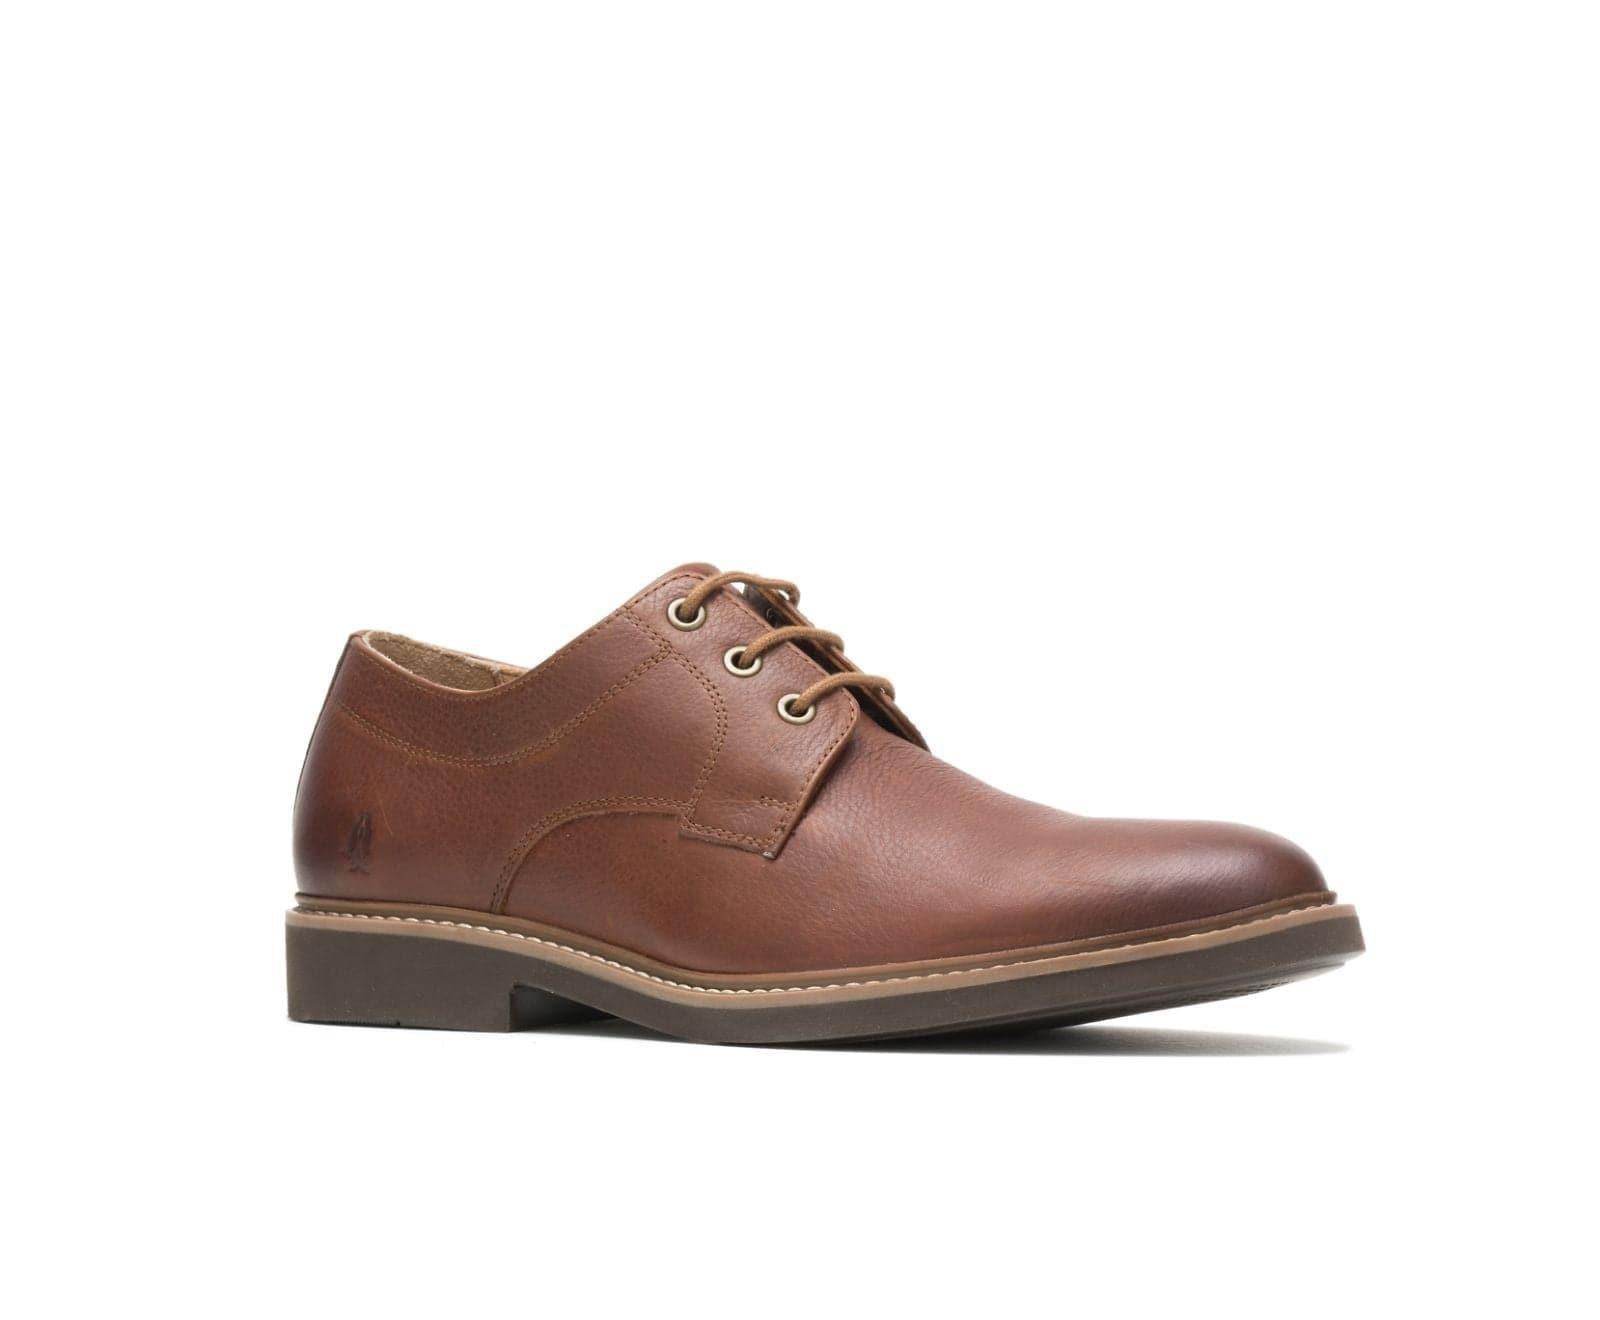 Laflamme- Chaussures oxford tan - Brother X Frère